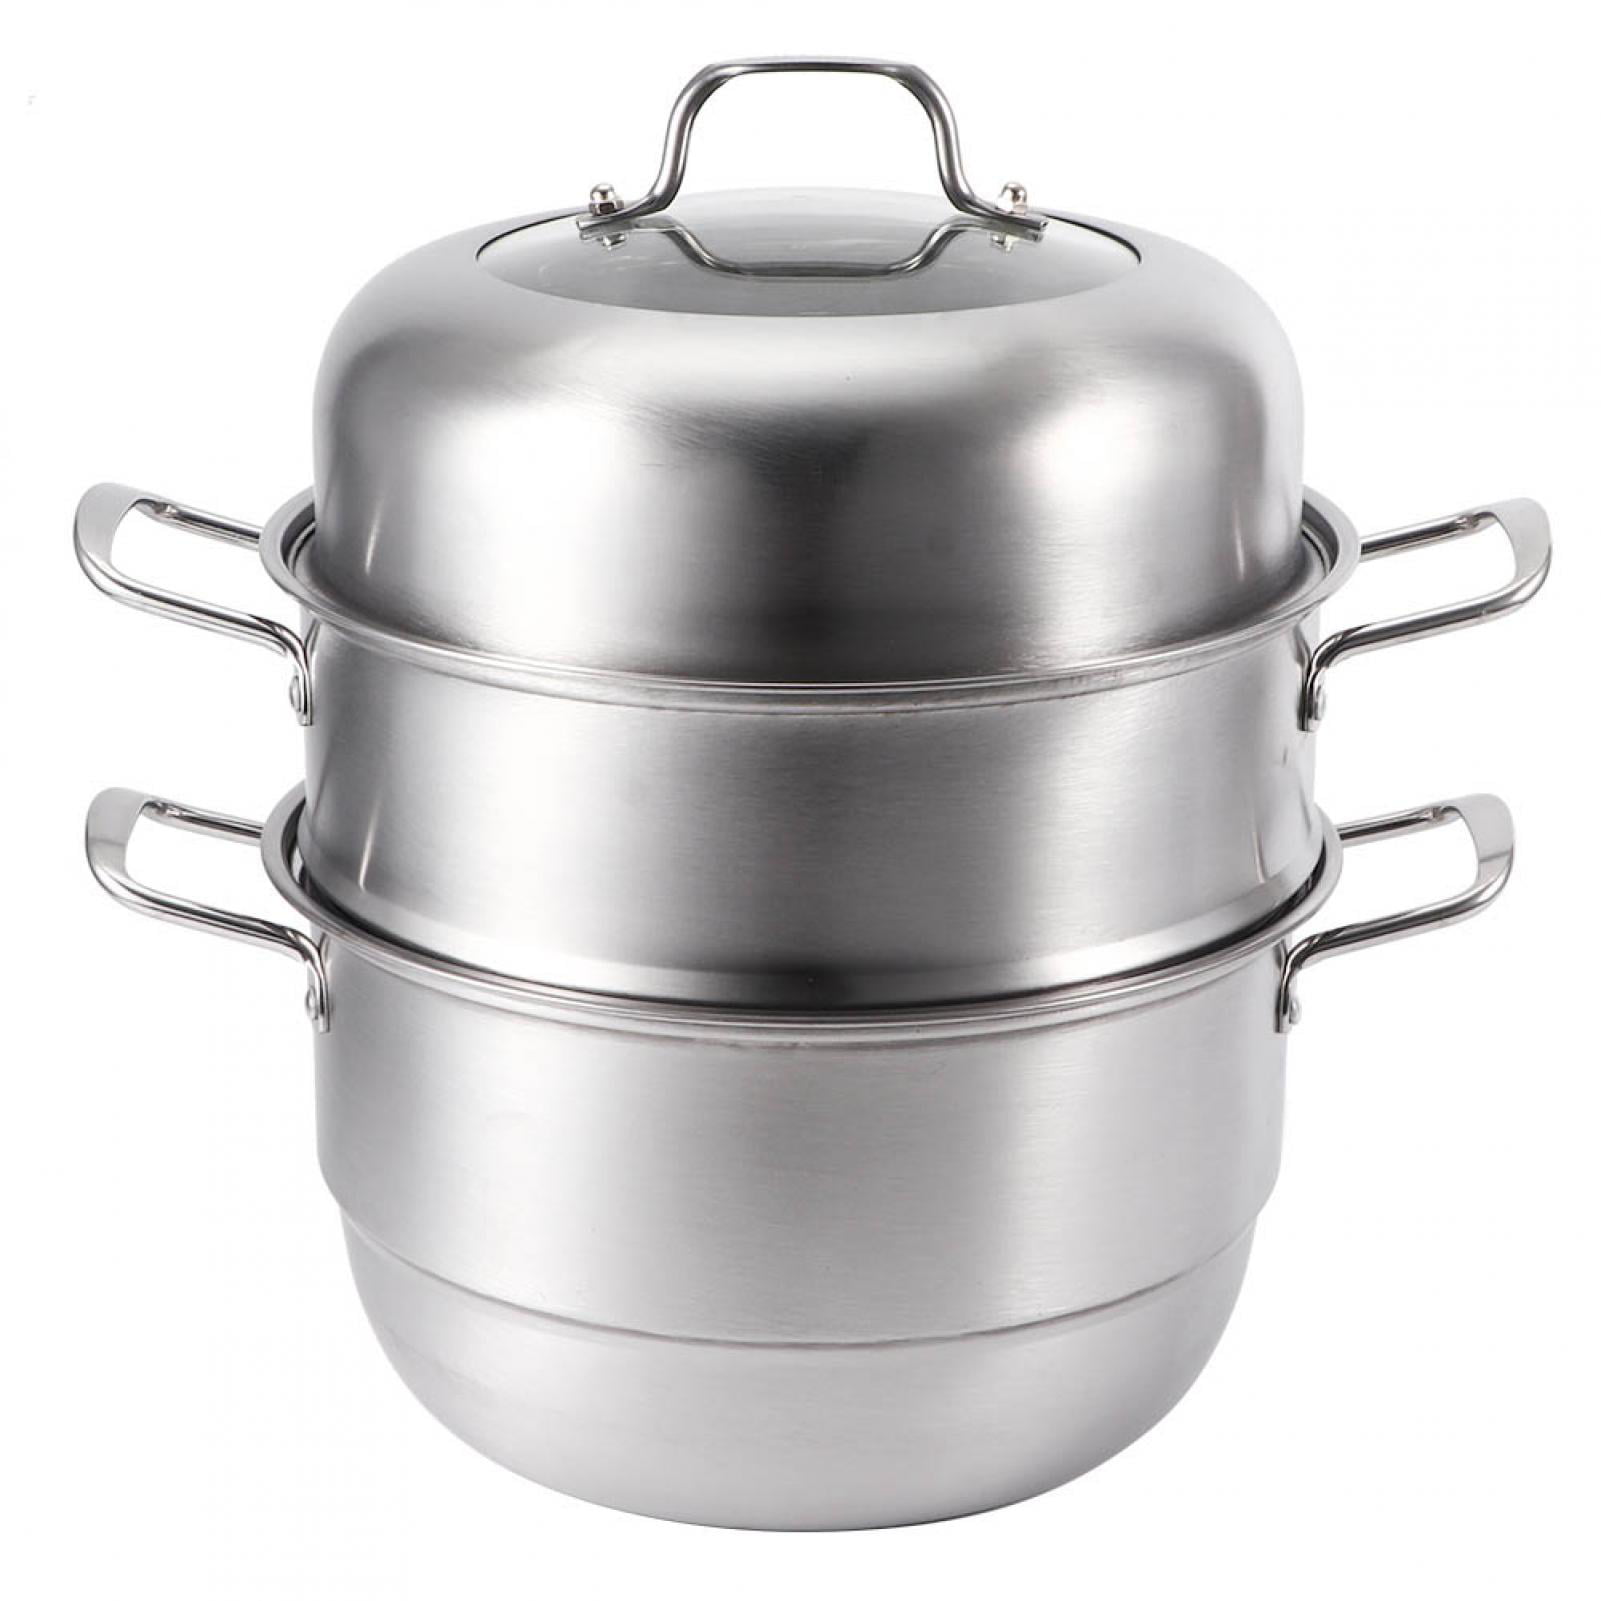 Details about   28CM 3 Tier Stainless Steamer Cooker Pot Set Pan Cook Food With Glass Lids r 